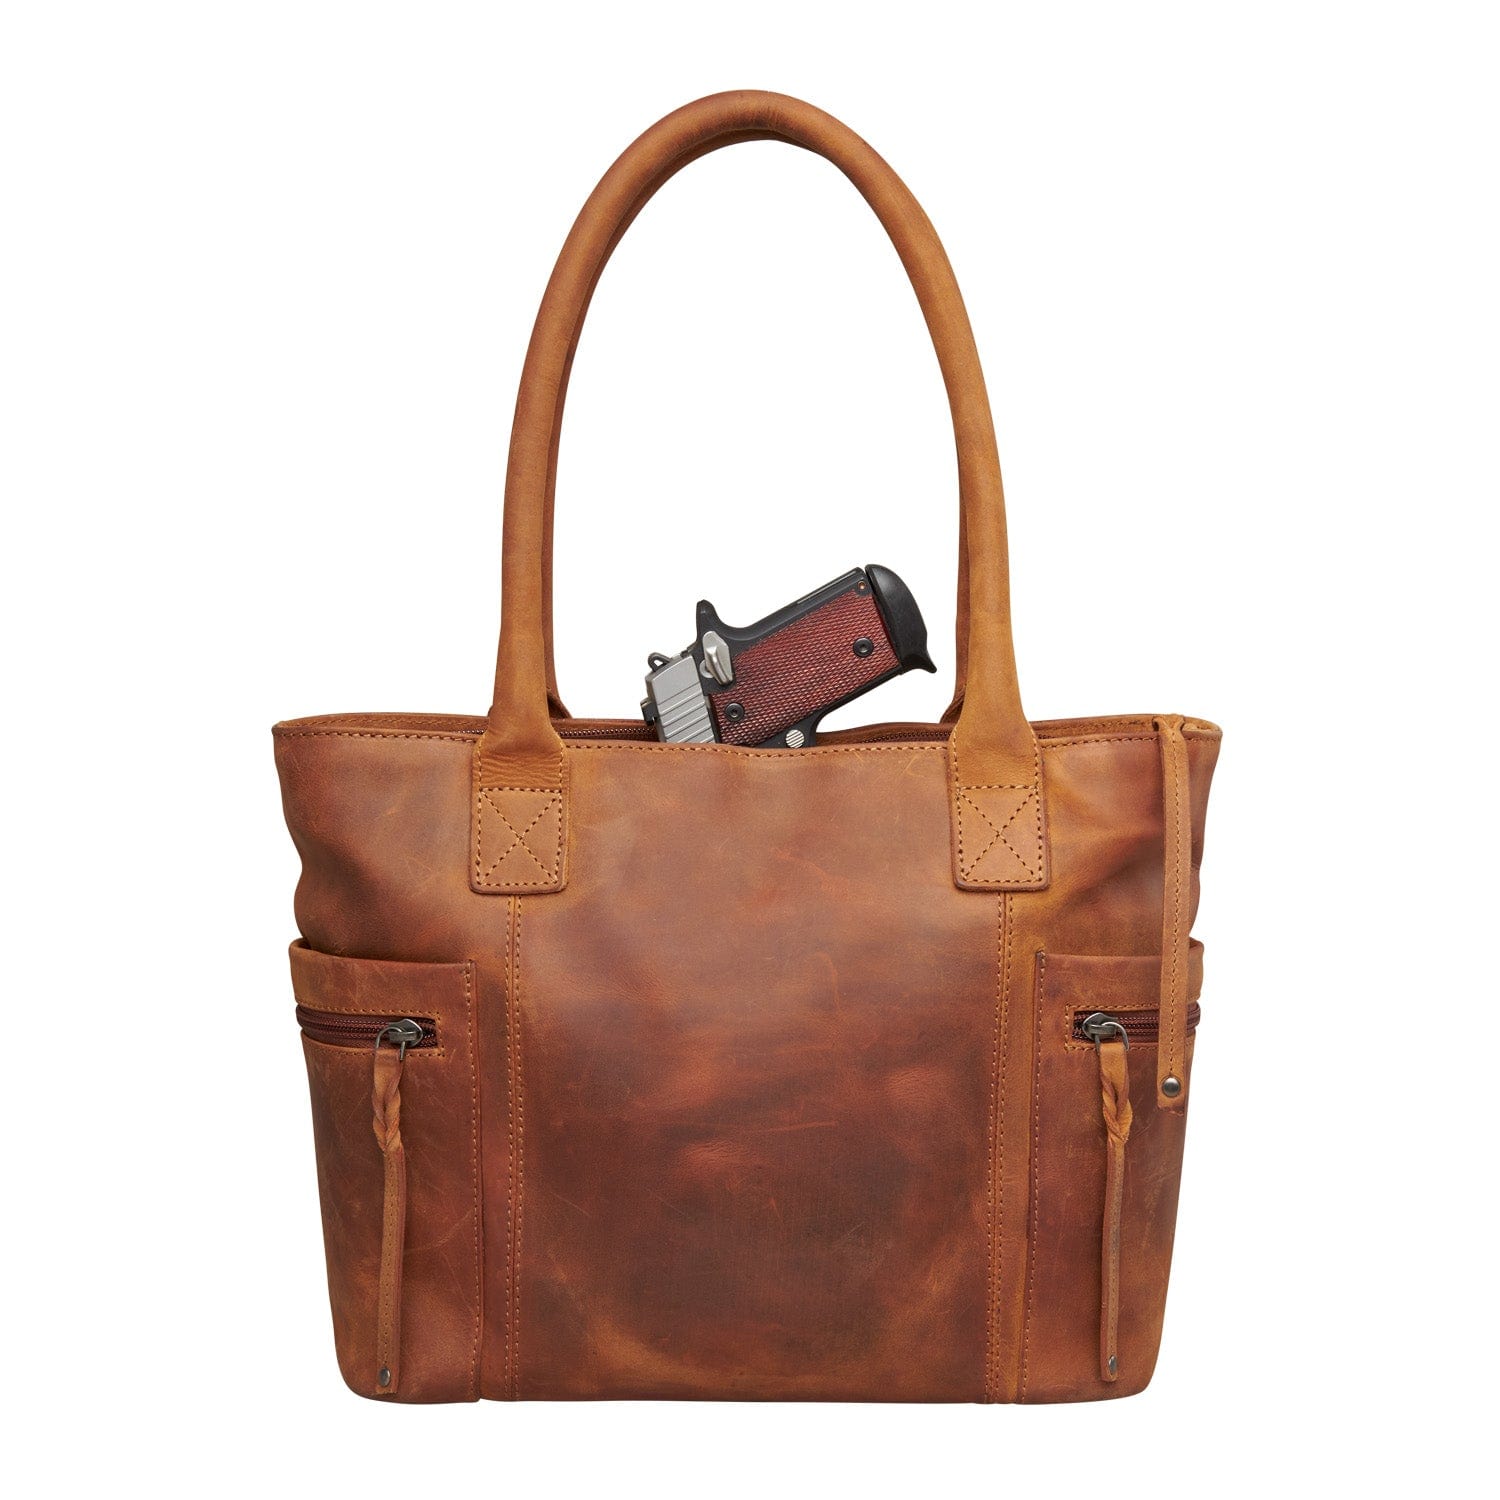 Concealed Carry Emerson Satchel by Lady Conceal -  handbag for gun -  Lady Conceal -  concealed carry Handbag for woman -  Conceal and Carry purse for Handgun -   Designer Luxury Conceal Carry Handbag -  YKK Locking Zippers and Universal Holster -  Unique Hide Handbag Gun and Pistol Bag -  carry Handbag for concealed gun carry -  Unique Emerson Satchel gun Handbag - 	 concealed carry Handbag Emerson Satchel gun Handbag -  concealed carry gun Handbag with locking zipper 